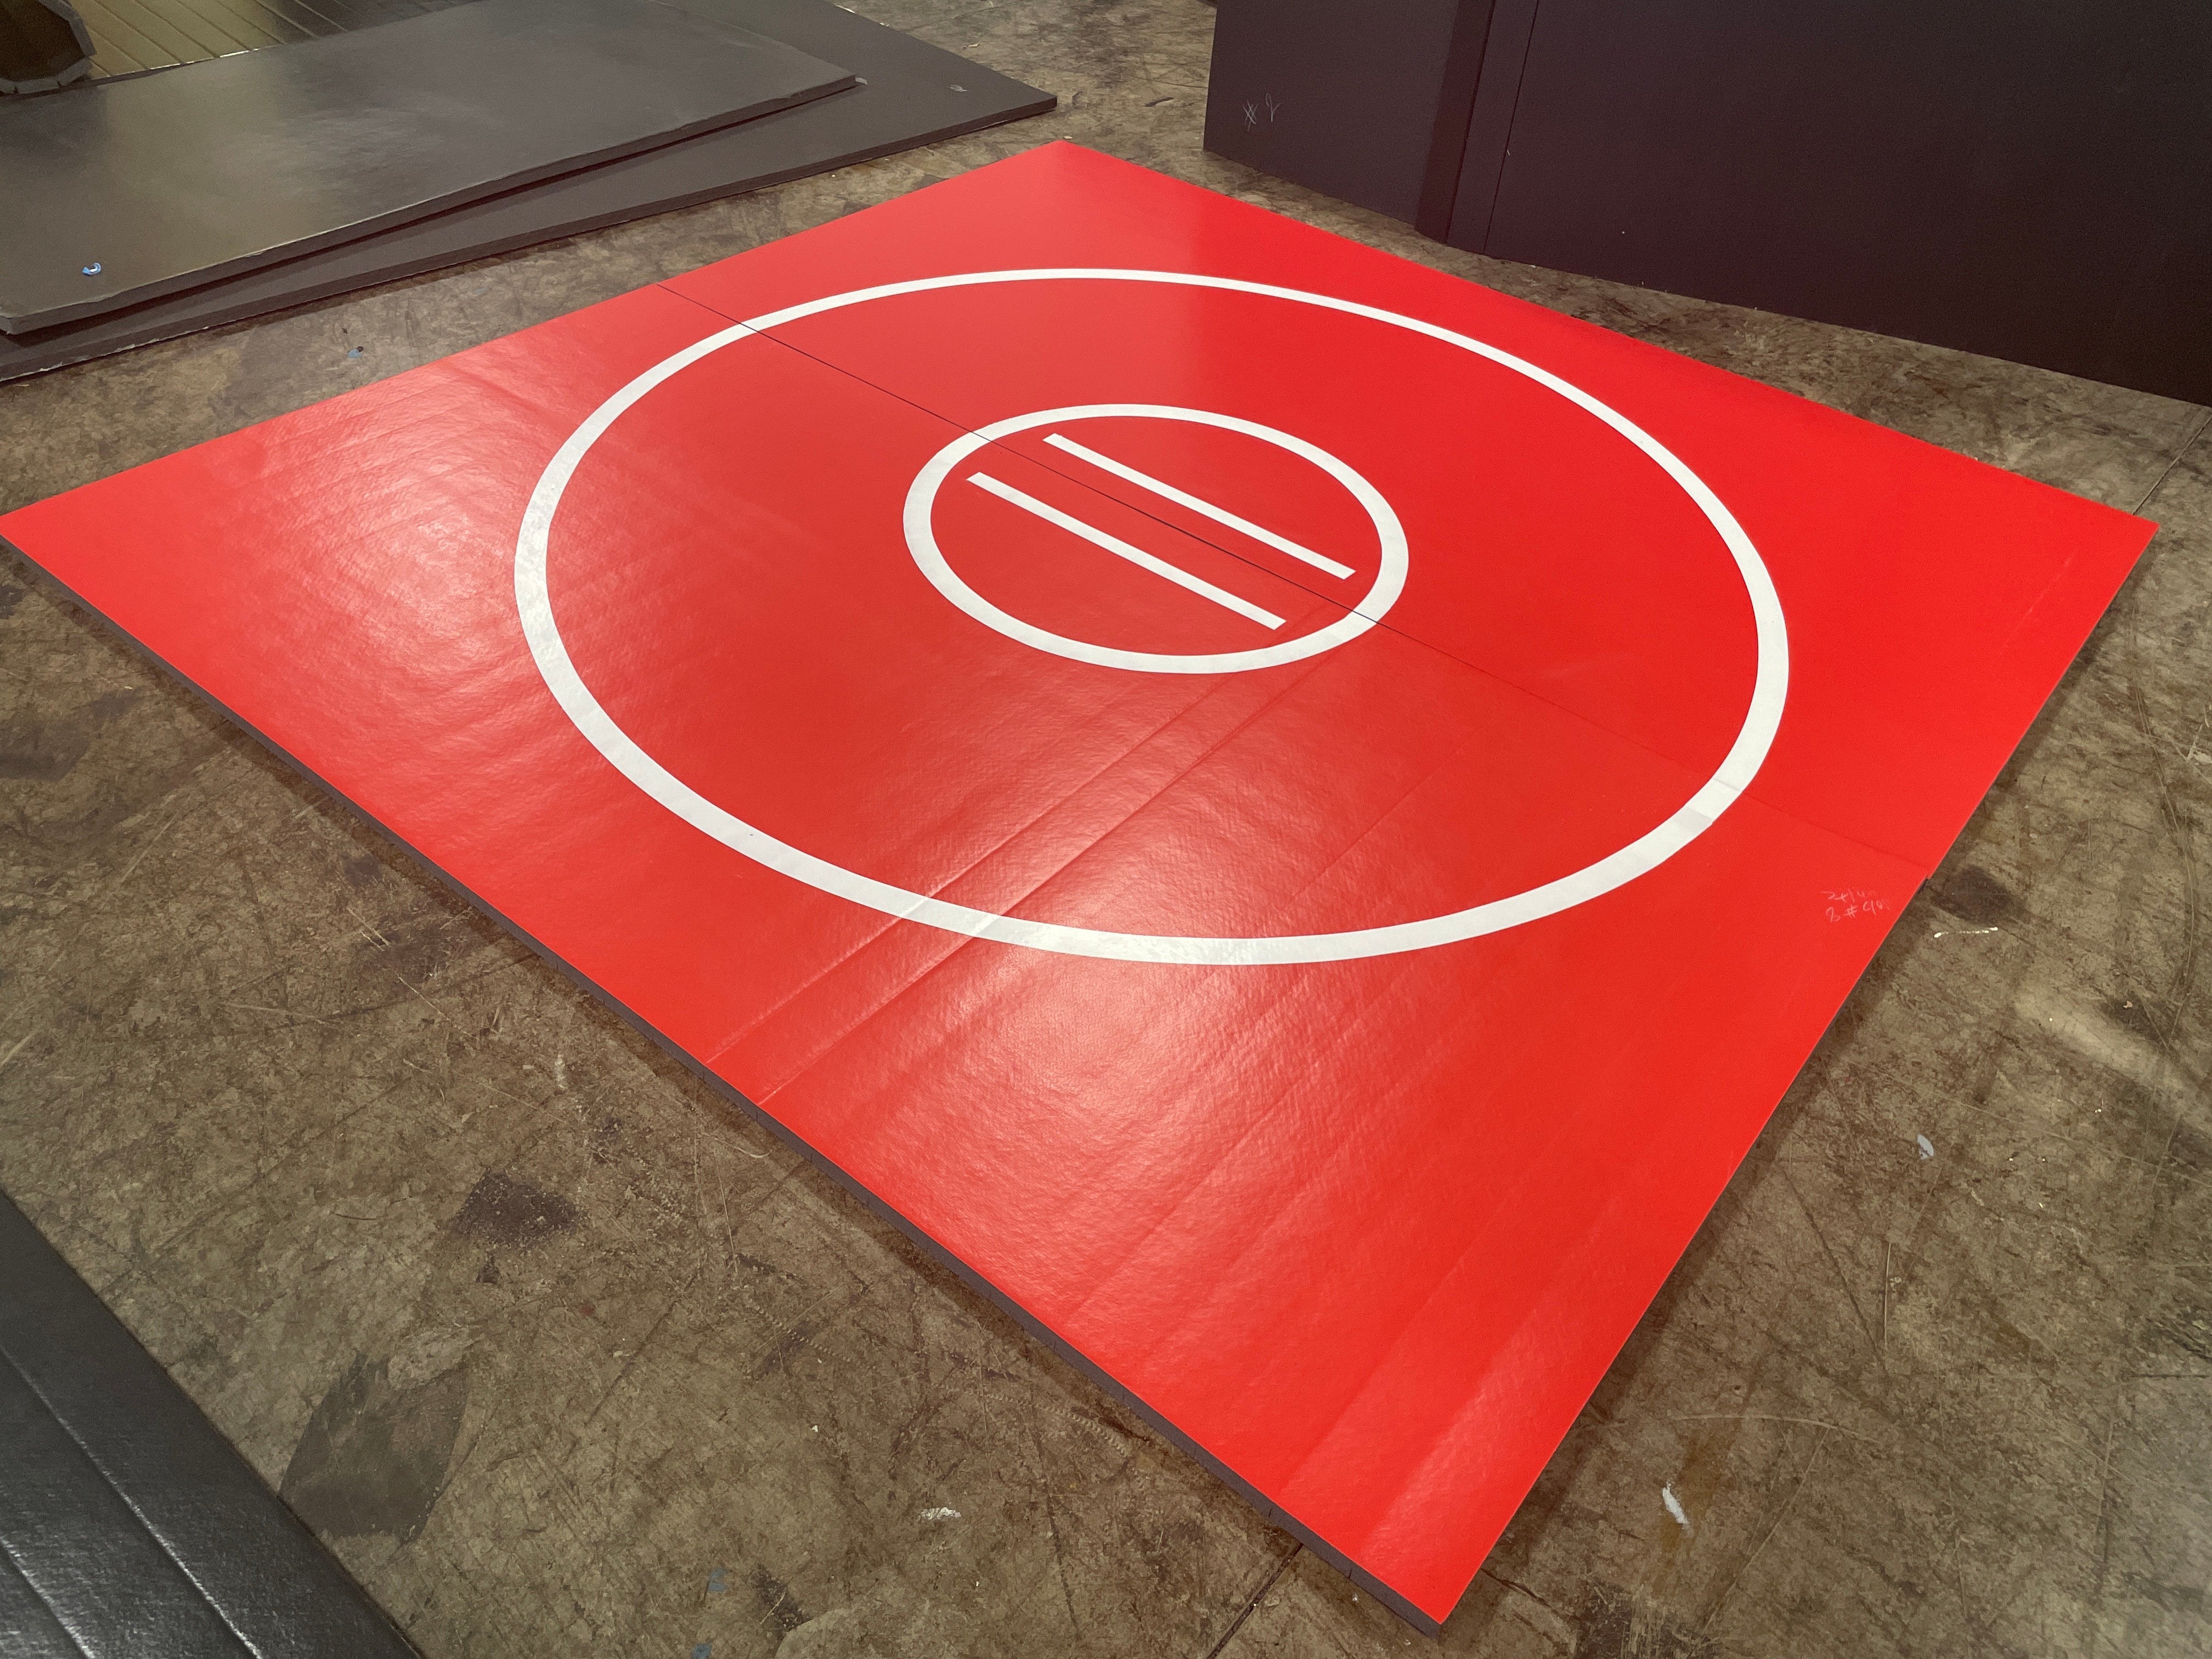 Clearance 118.5" x 10' x 1 3/8" Roll-Up Wrestling mat Red with White Circles